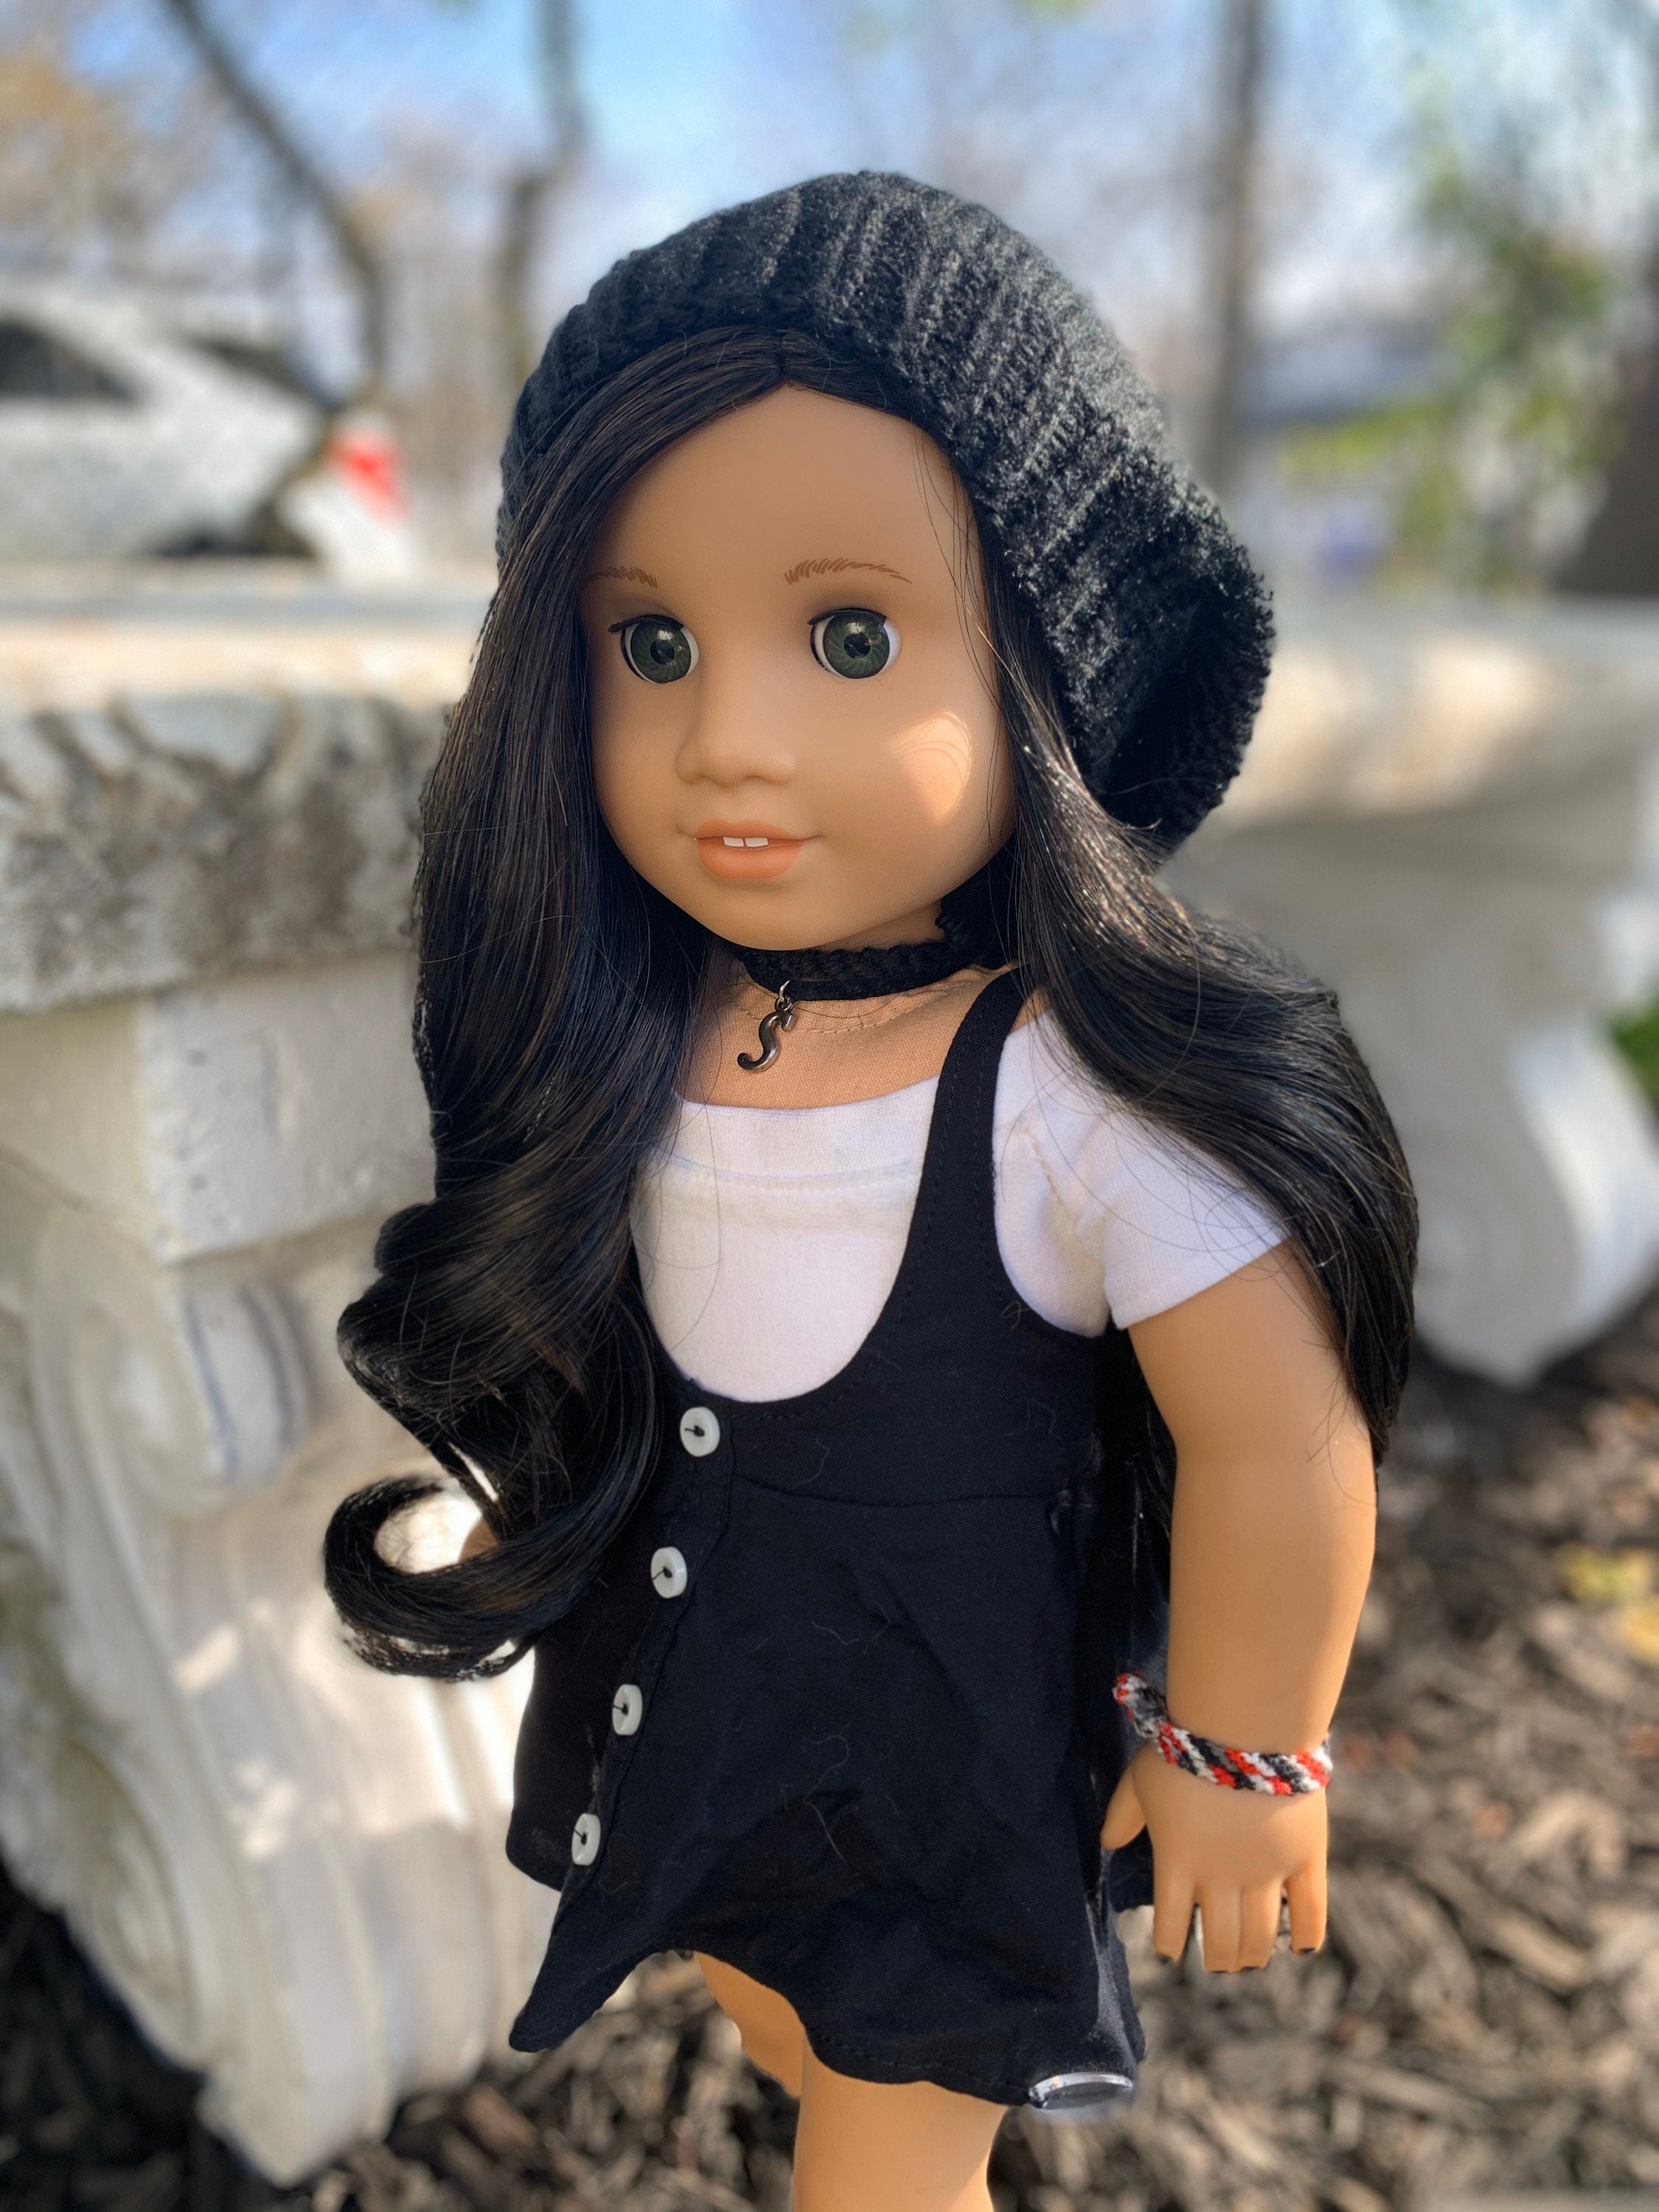 Reproduction Samantha Doll Lawn Party Dress for 18 Inch Dolls Like American  Girl Samantha Doll Clothing for 18 Dolls Victorian Doll Dress 